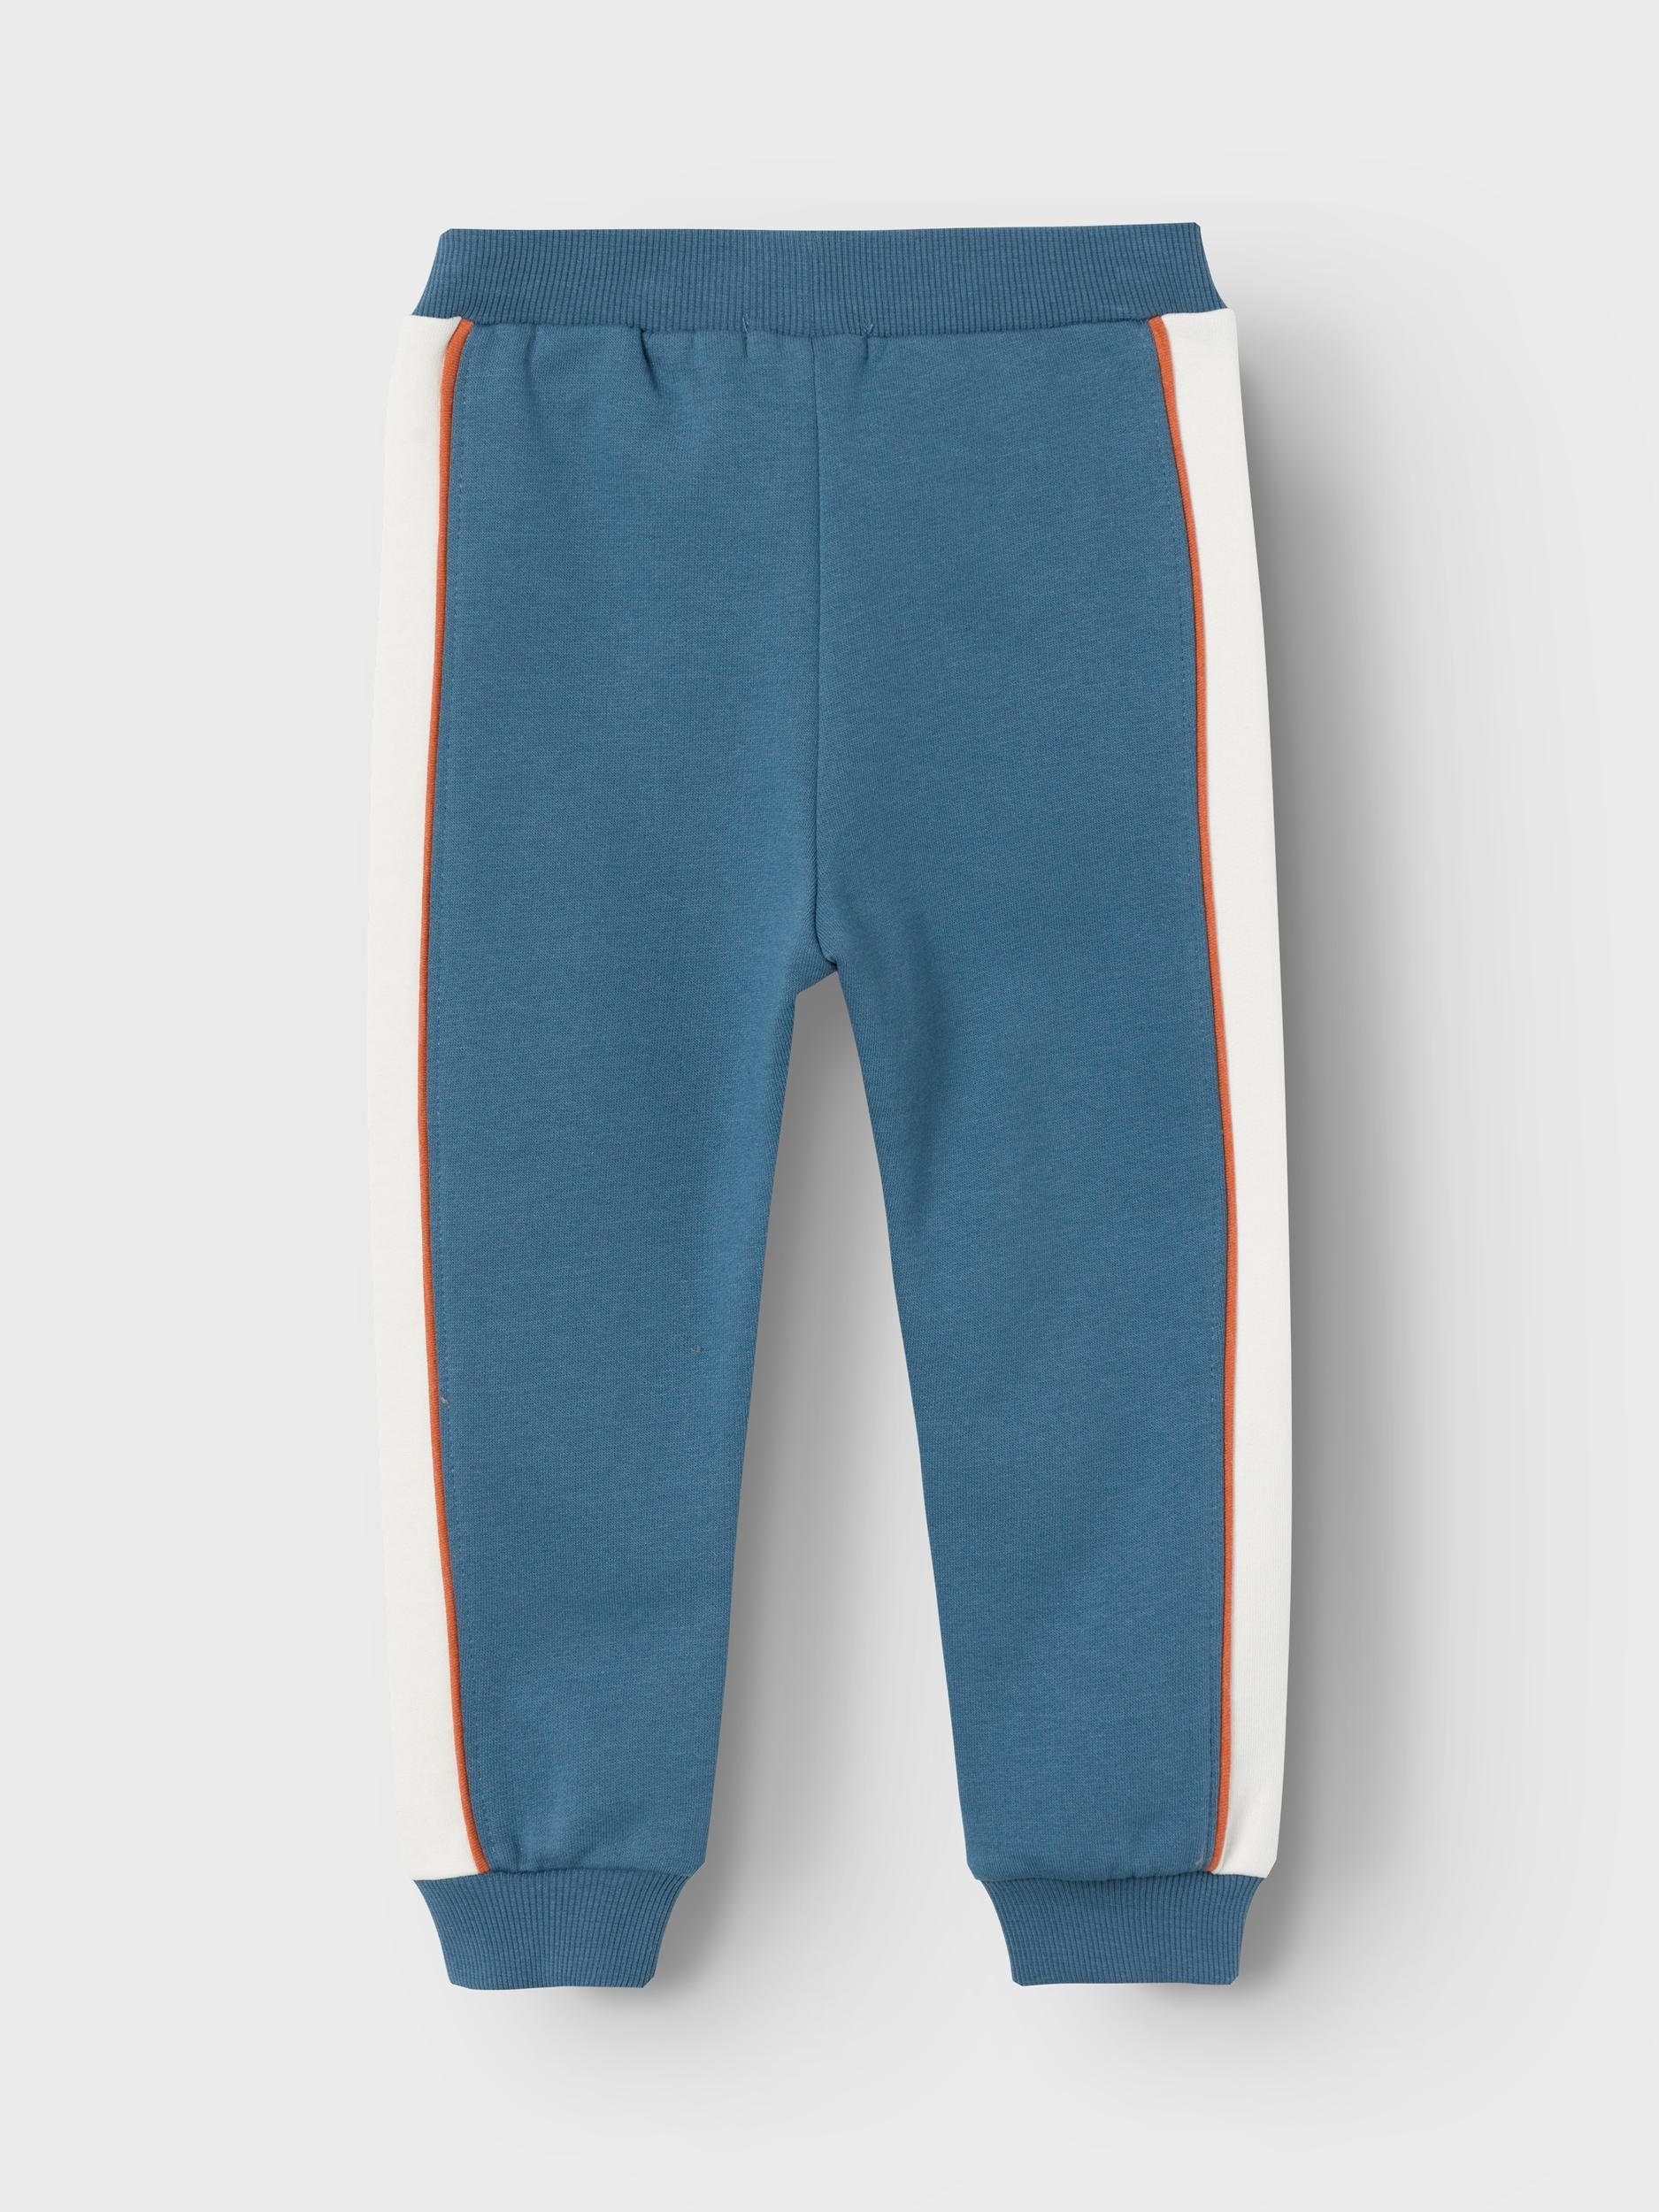 Boy's Nulle Sweat Pant-Back View